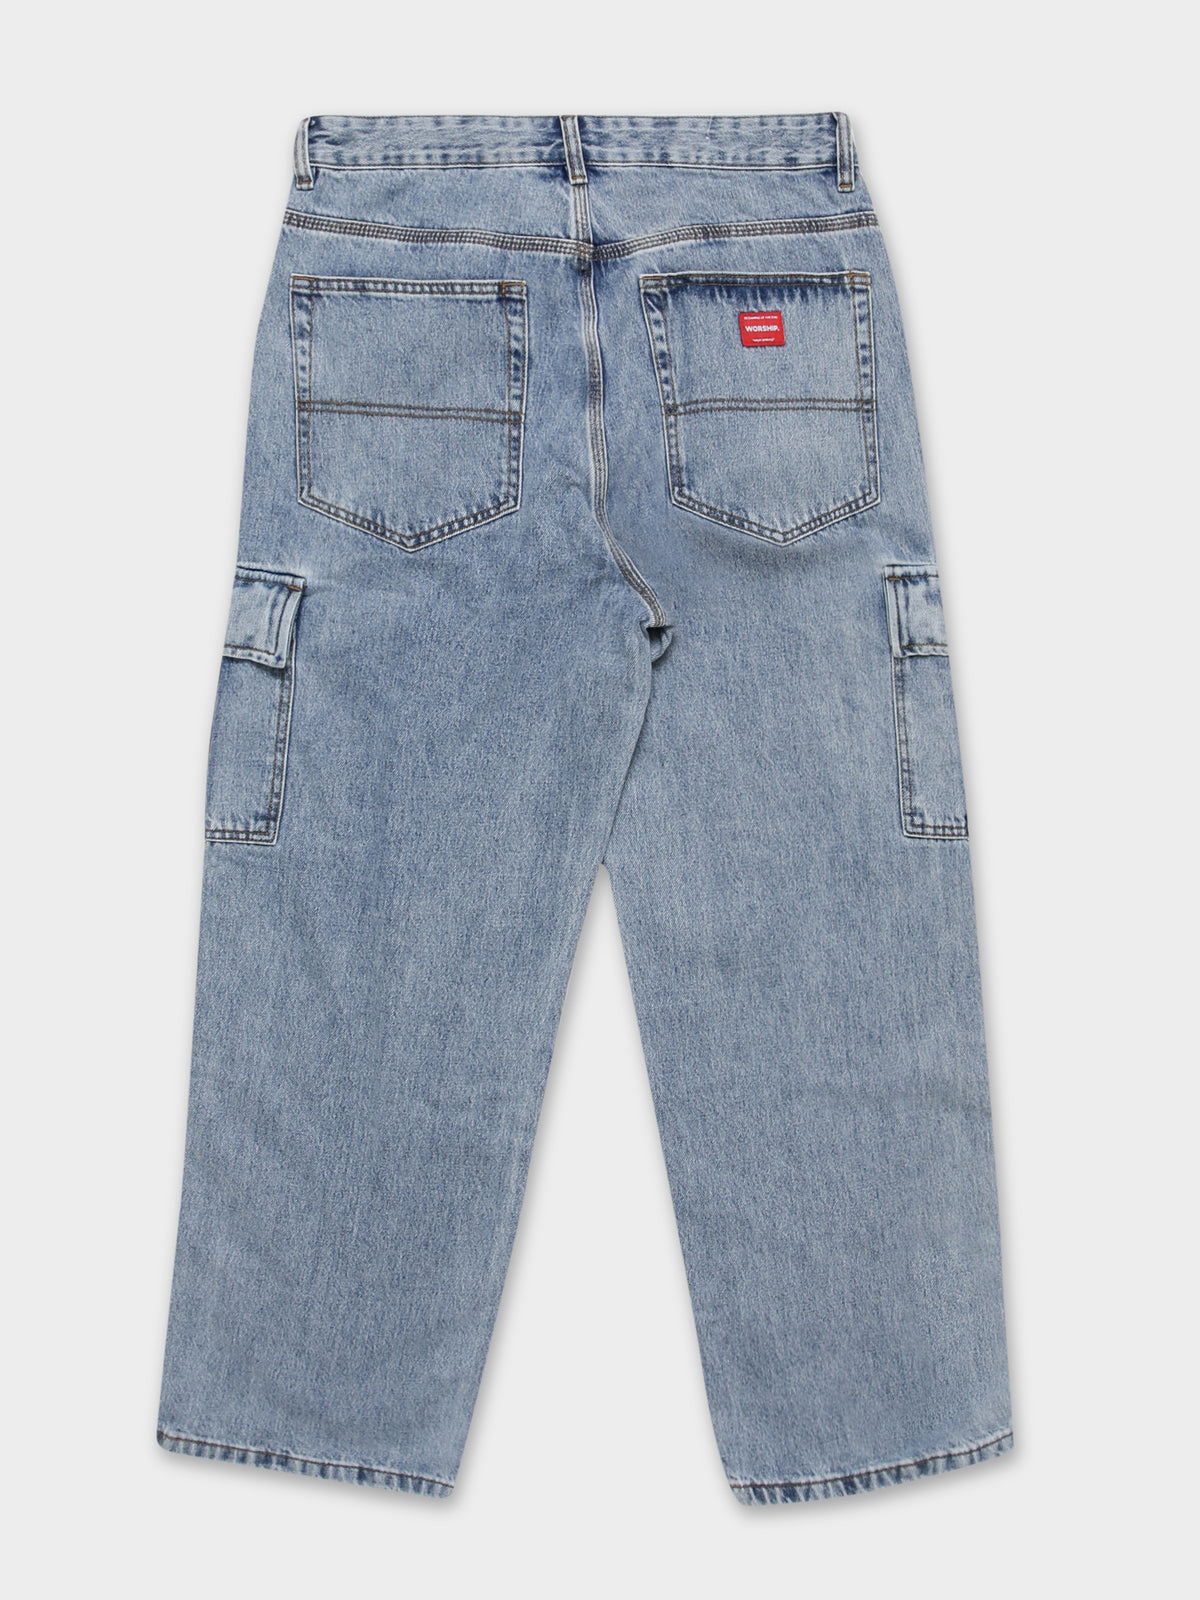 Big Lounger Cargo Jeans in Blue